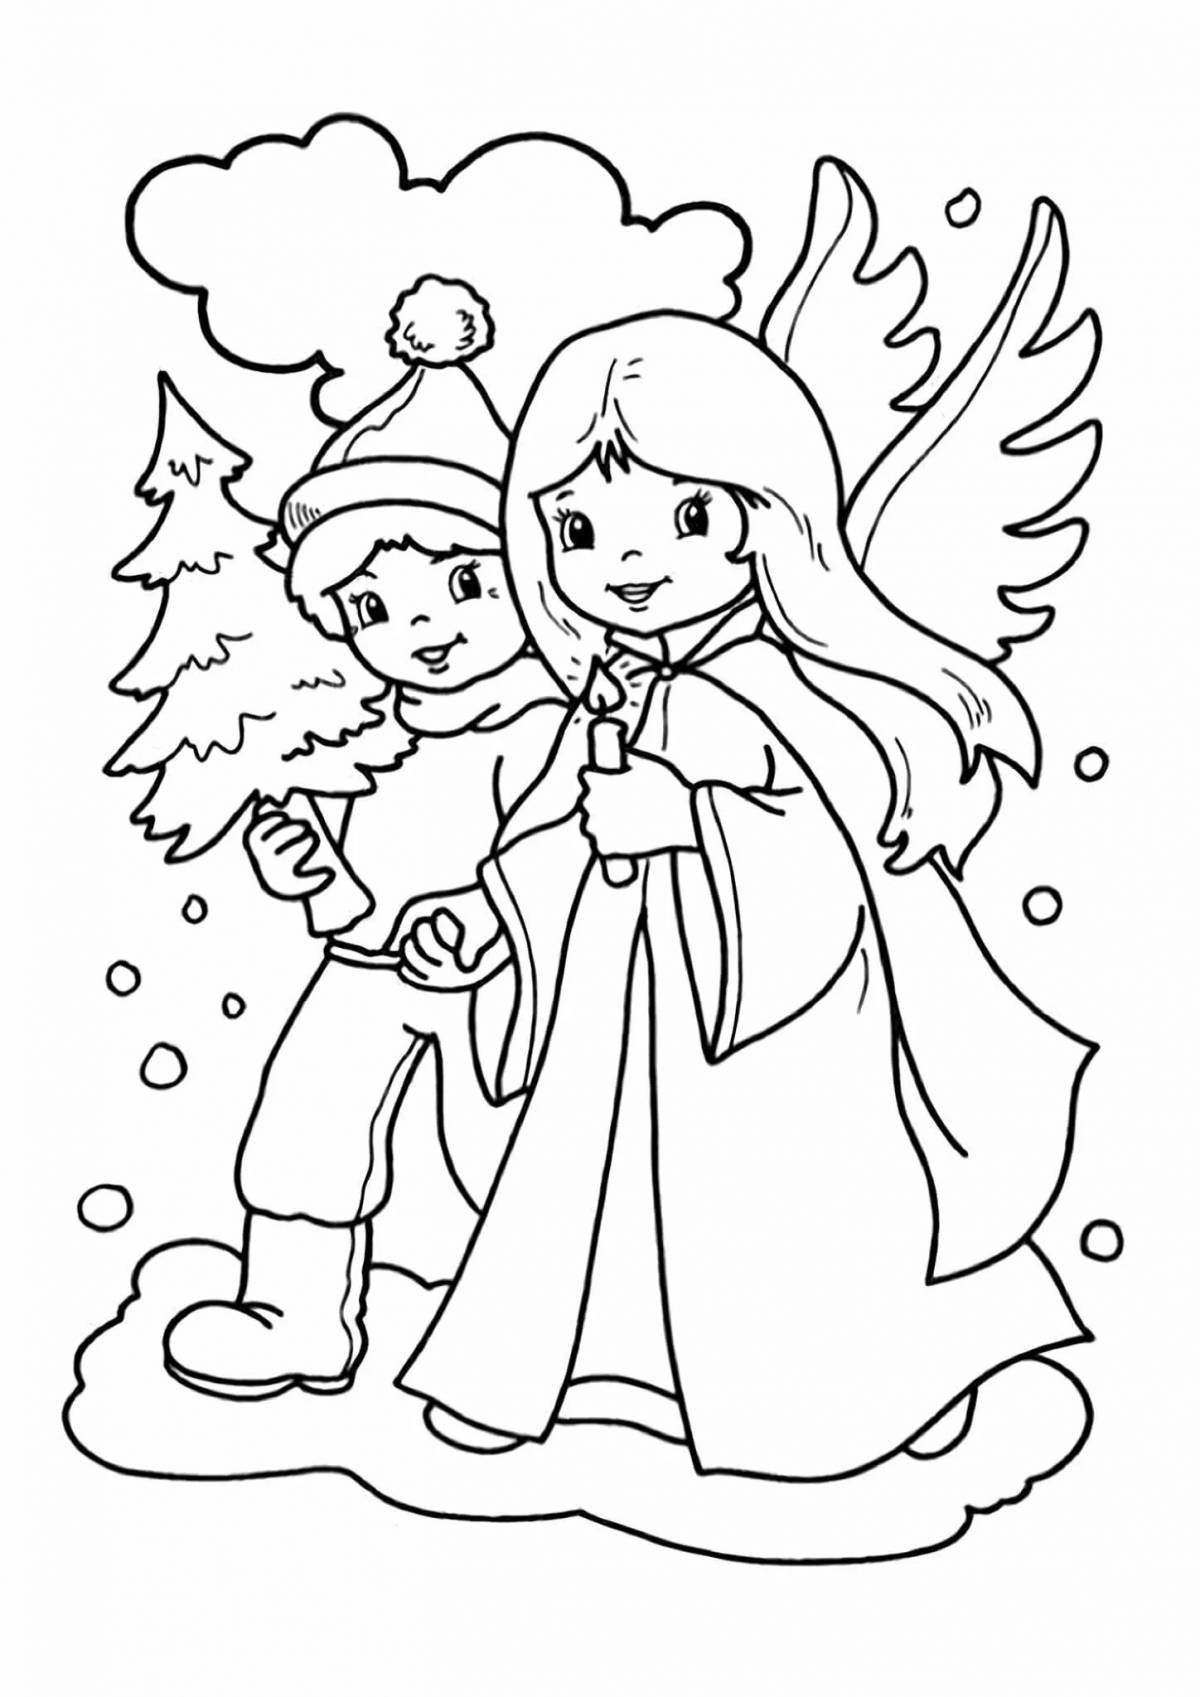 Amazing Christmas coloring book for 5-6 year olds